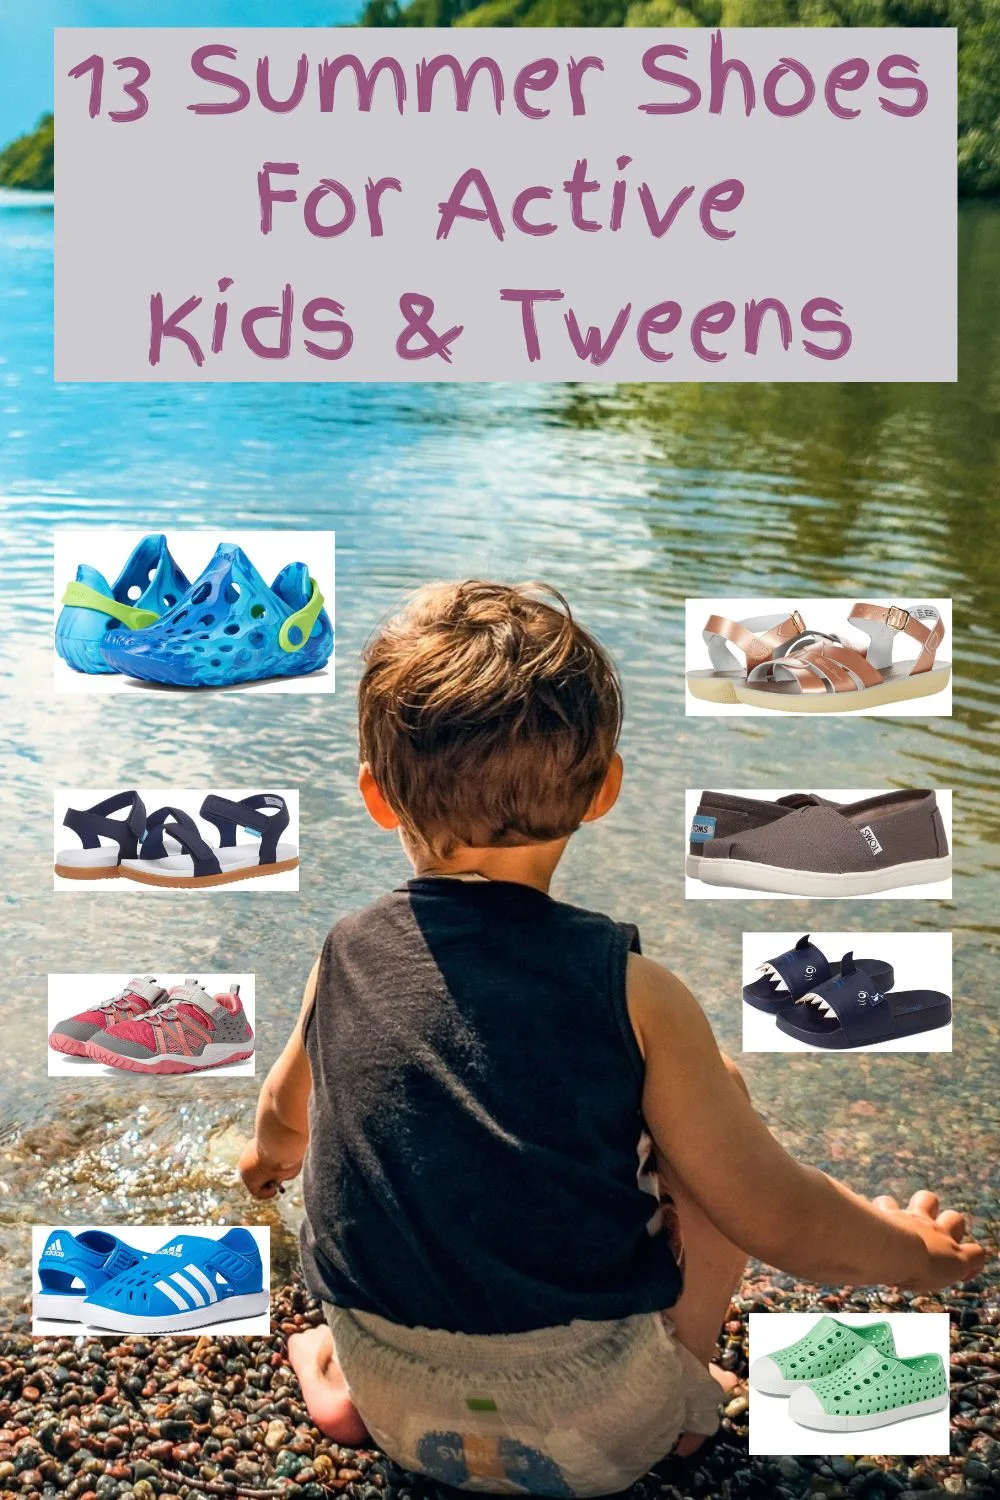 13 summer sneakers, sport sandals and water shoes that will keep active kids cool and comfortable all summer long. and that will last the season no matter what they do to them.